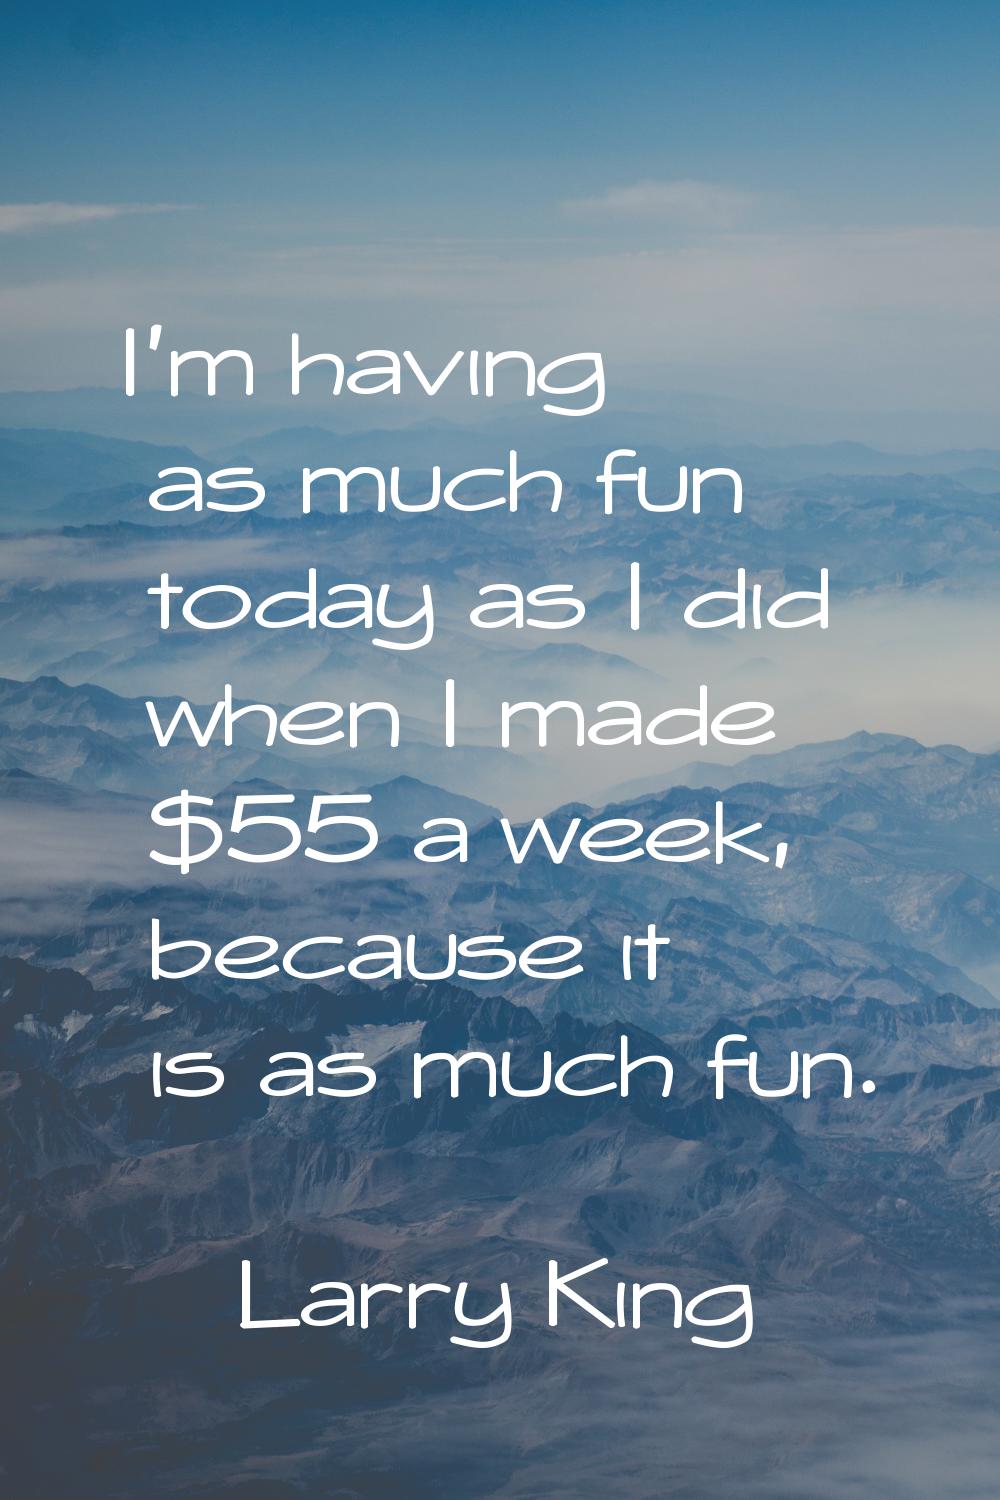 I'm having as much fun today as I did when I made $55 a week, because it is as much fun.